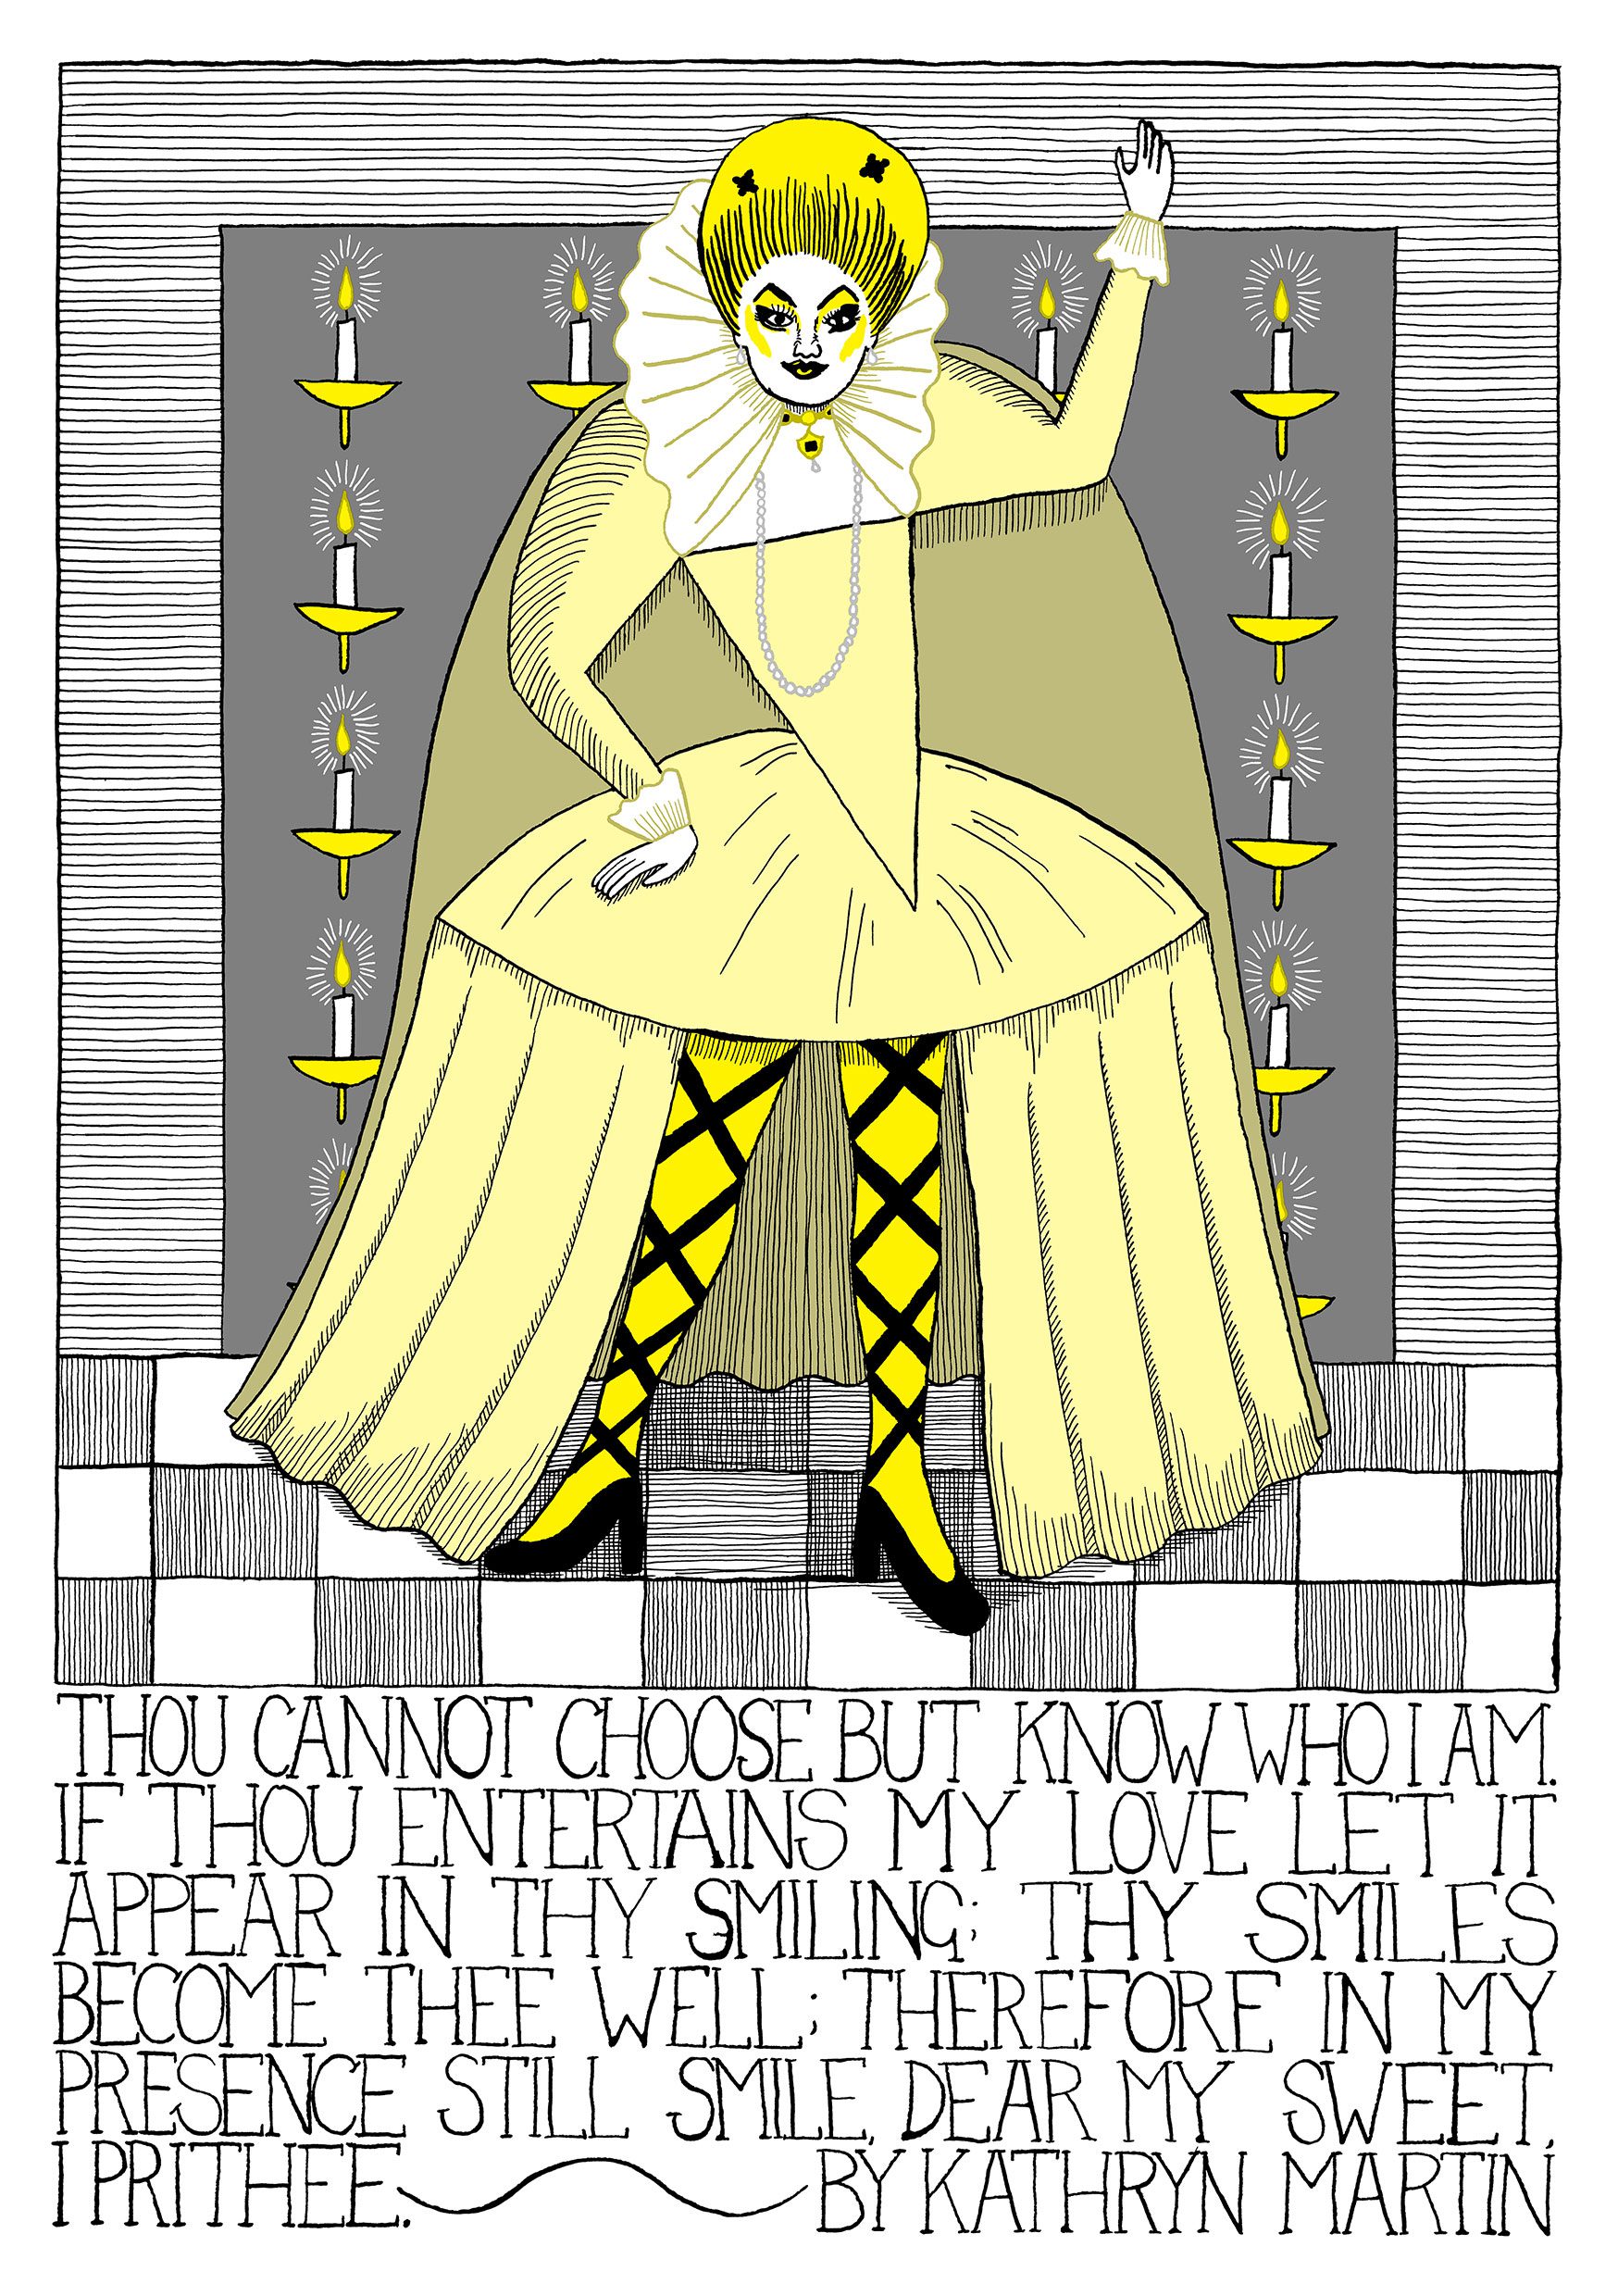 Image of artwork by Kathryn Martin, featuring the character Malvolio from the play, Twelfth Night, in drag. 